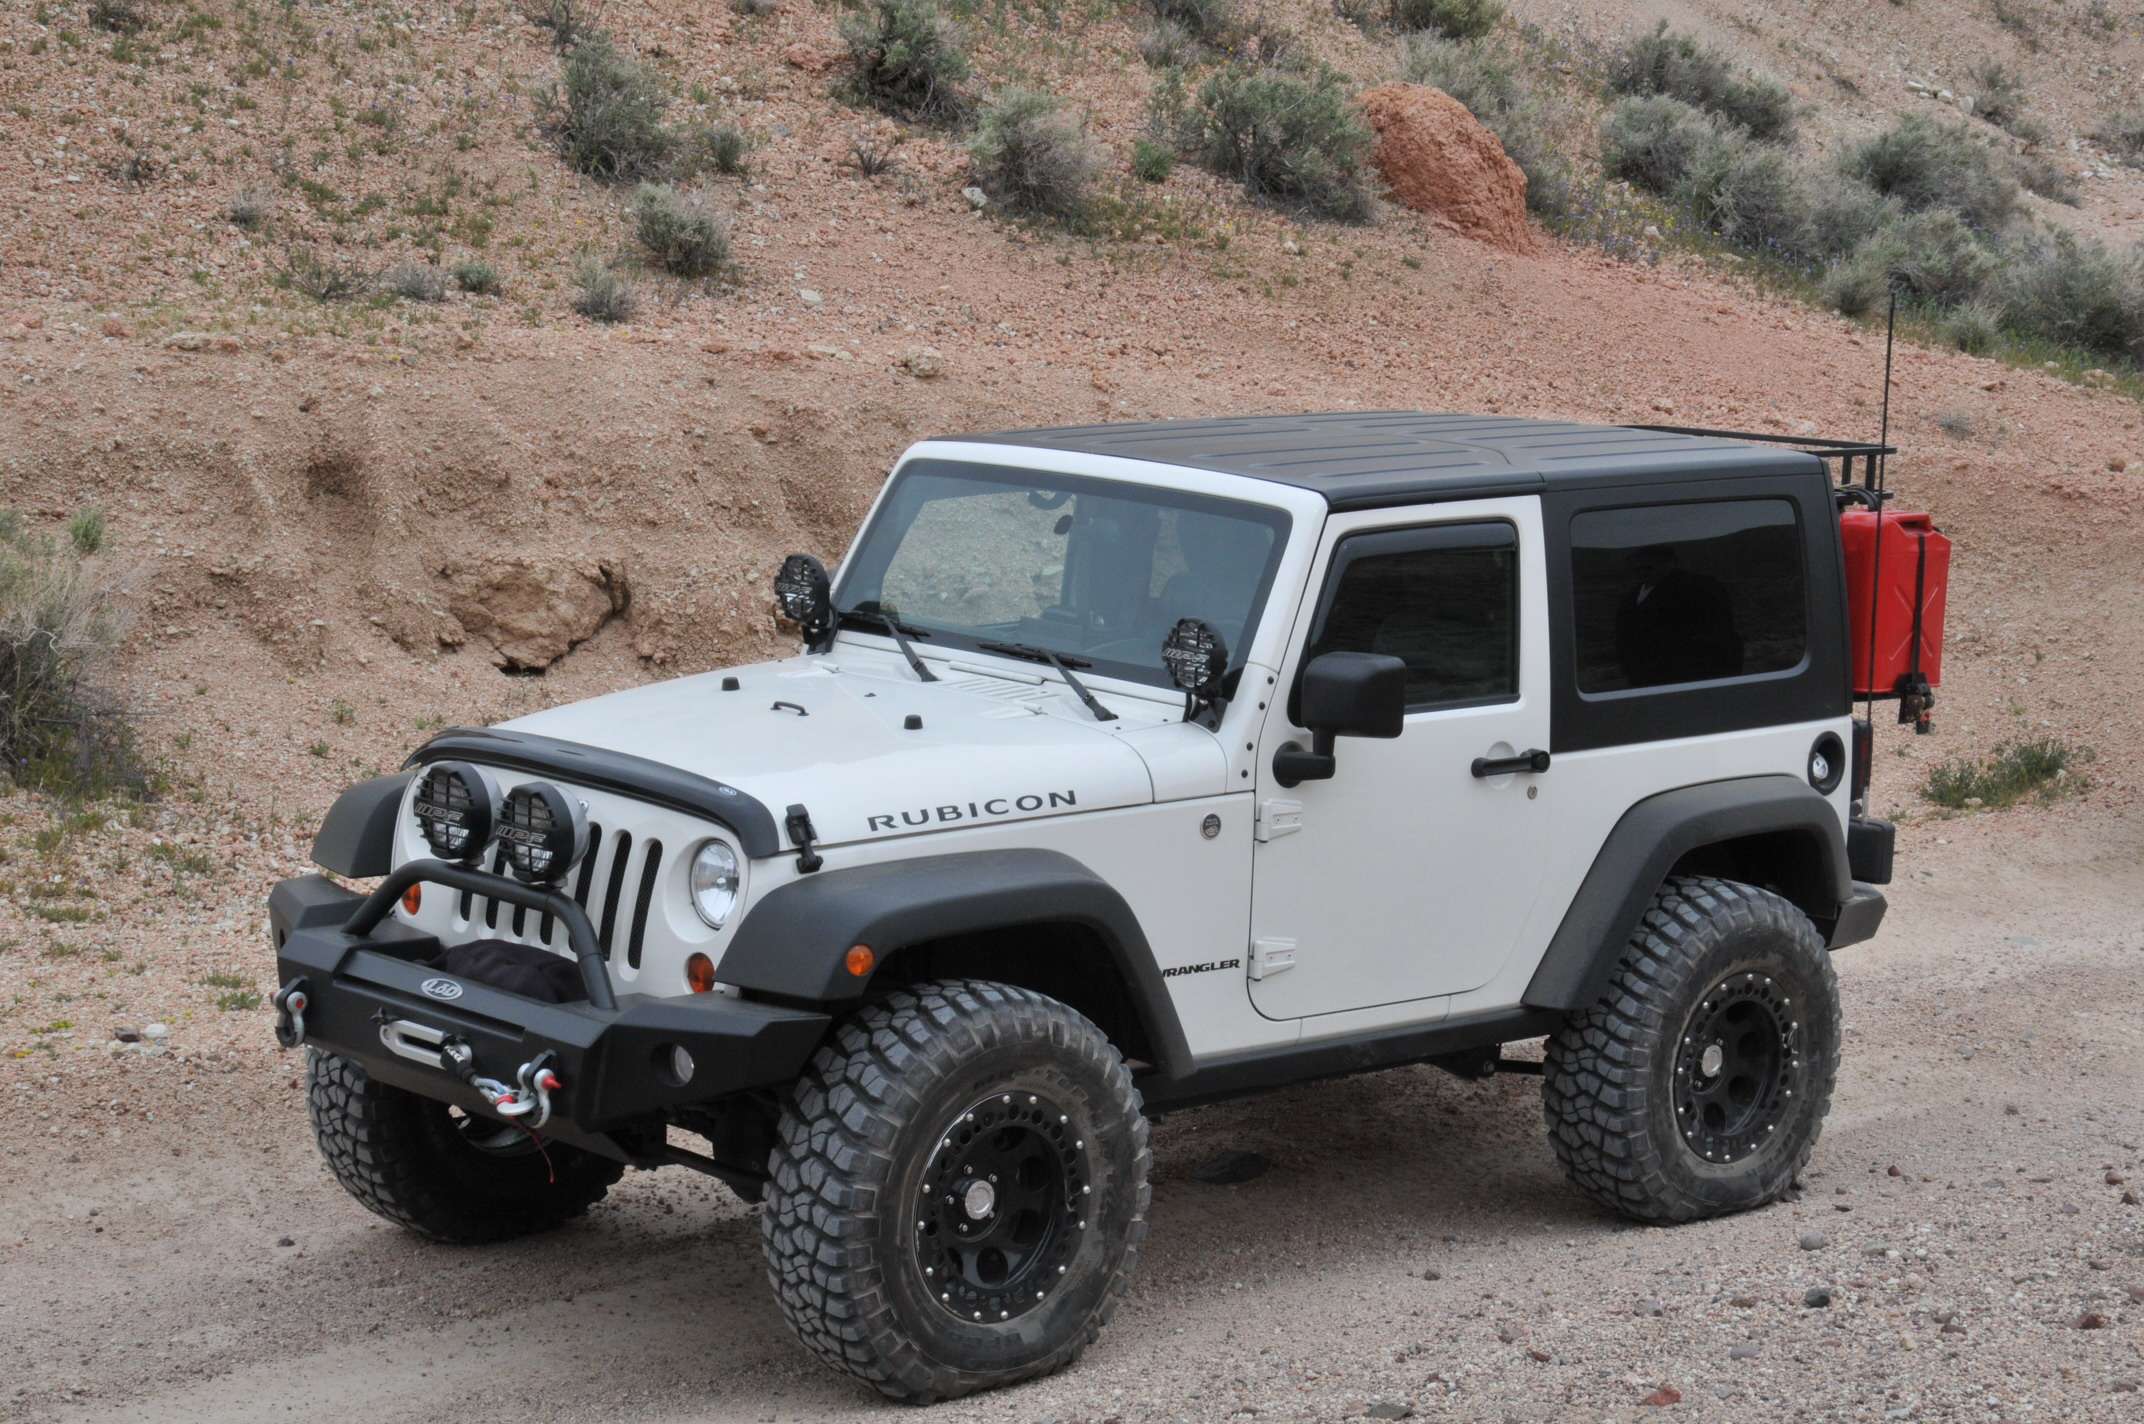  inch lift and 35s?  - The top destination for Jeep JK and  JL Wrangler news, rumors, and discussion